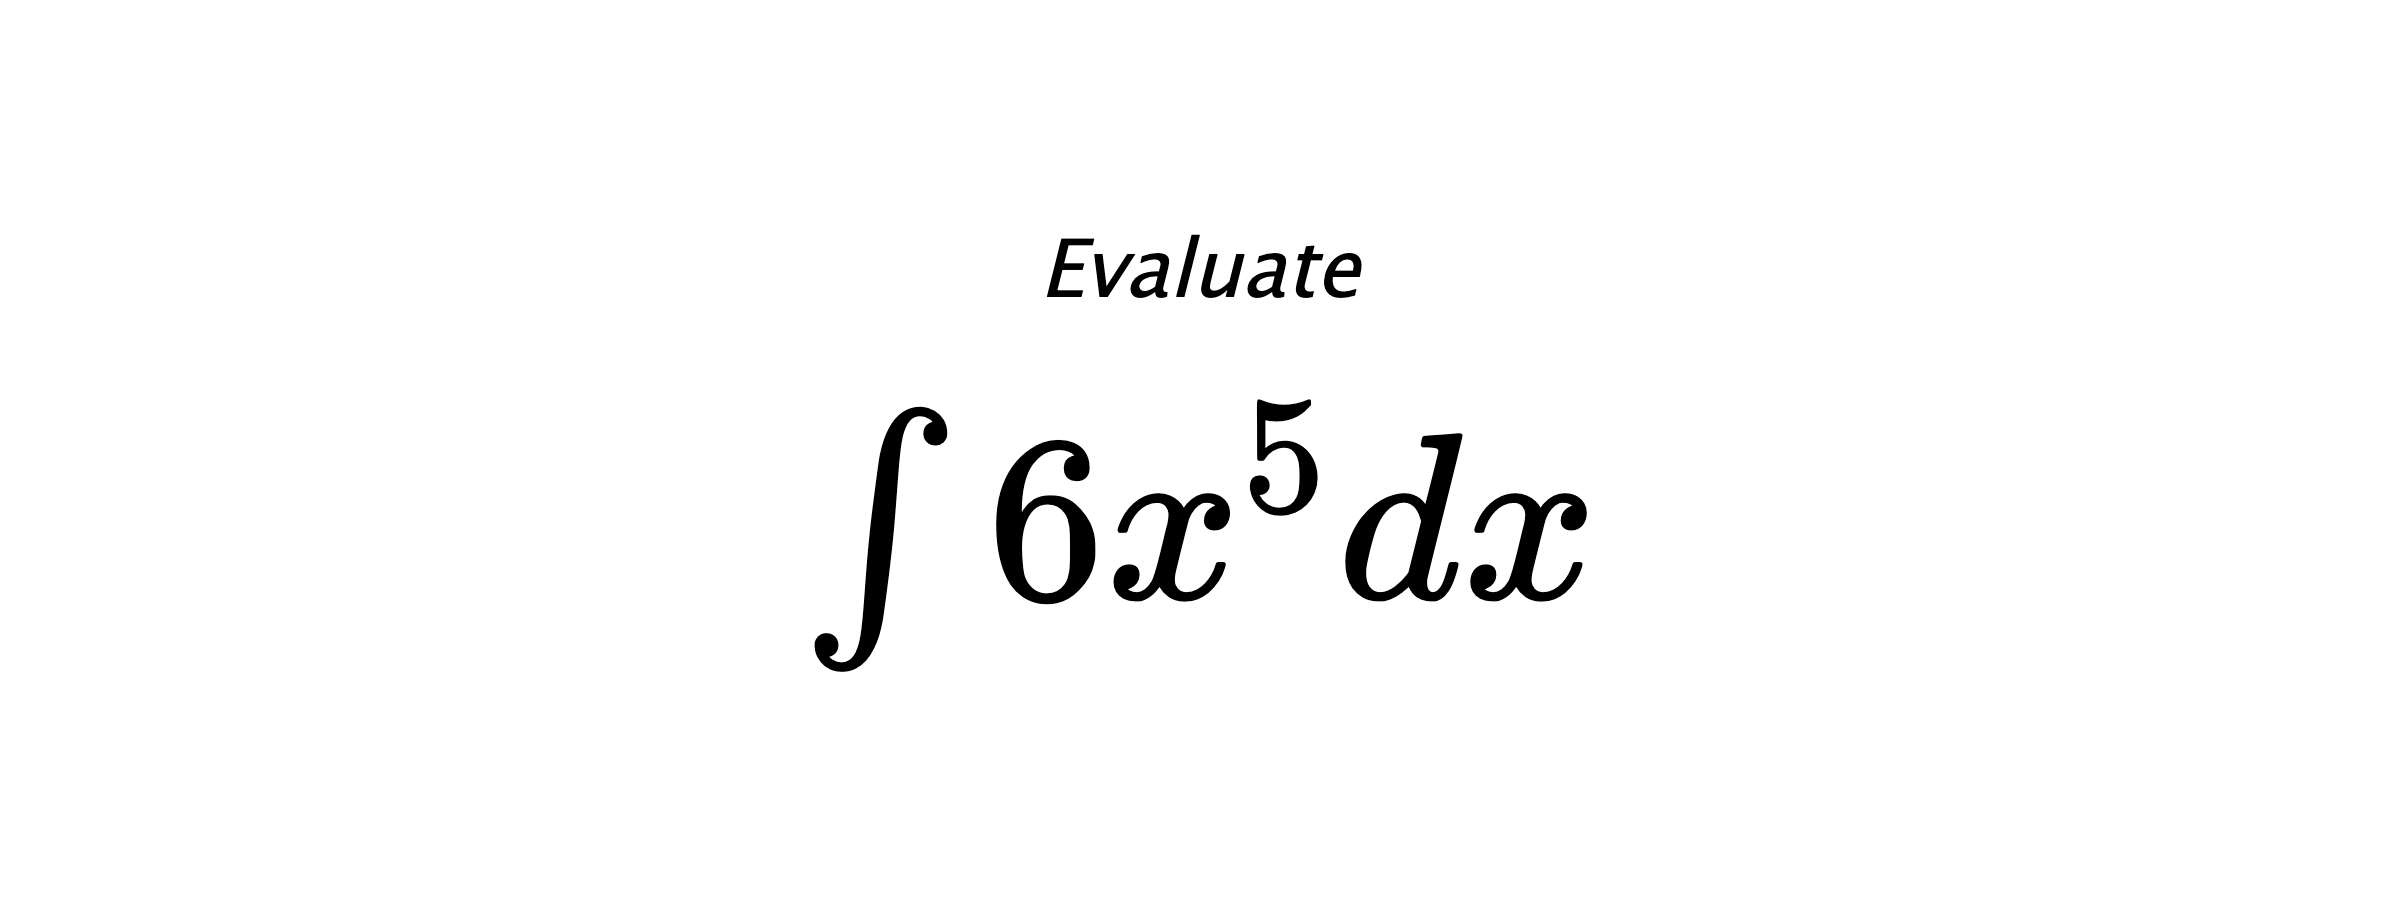 Evaluate $ \int 6 x^{5} dx $